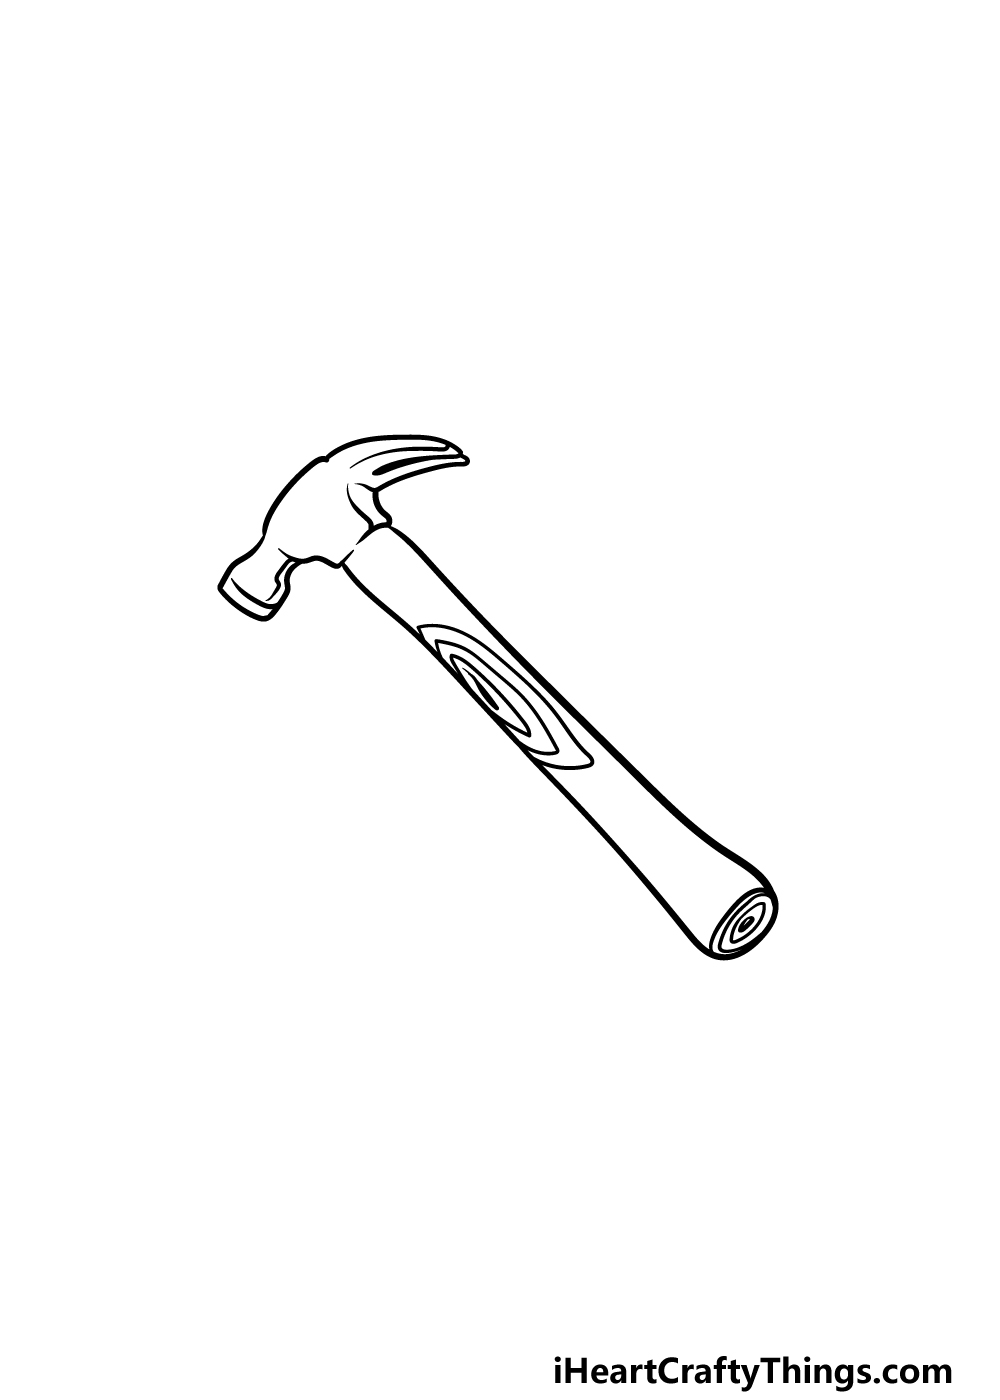 Hammer Drawing - How To Draw A Hammer Step By Step